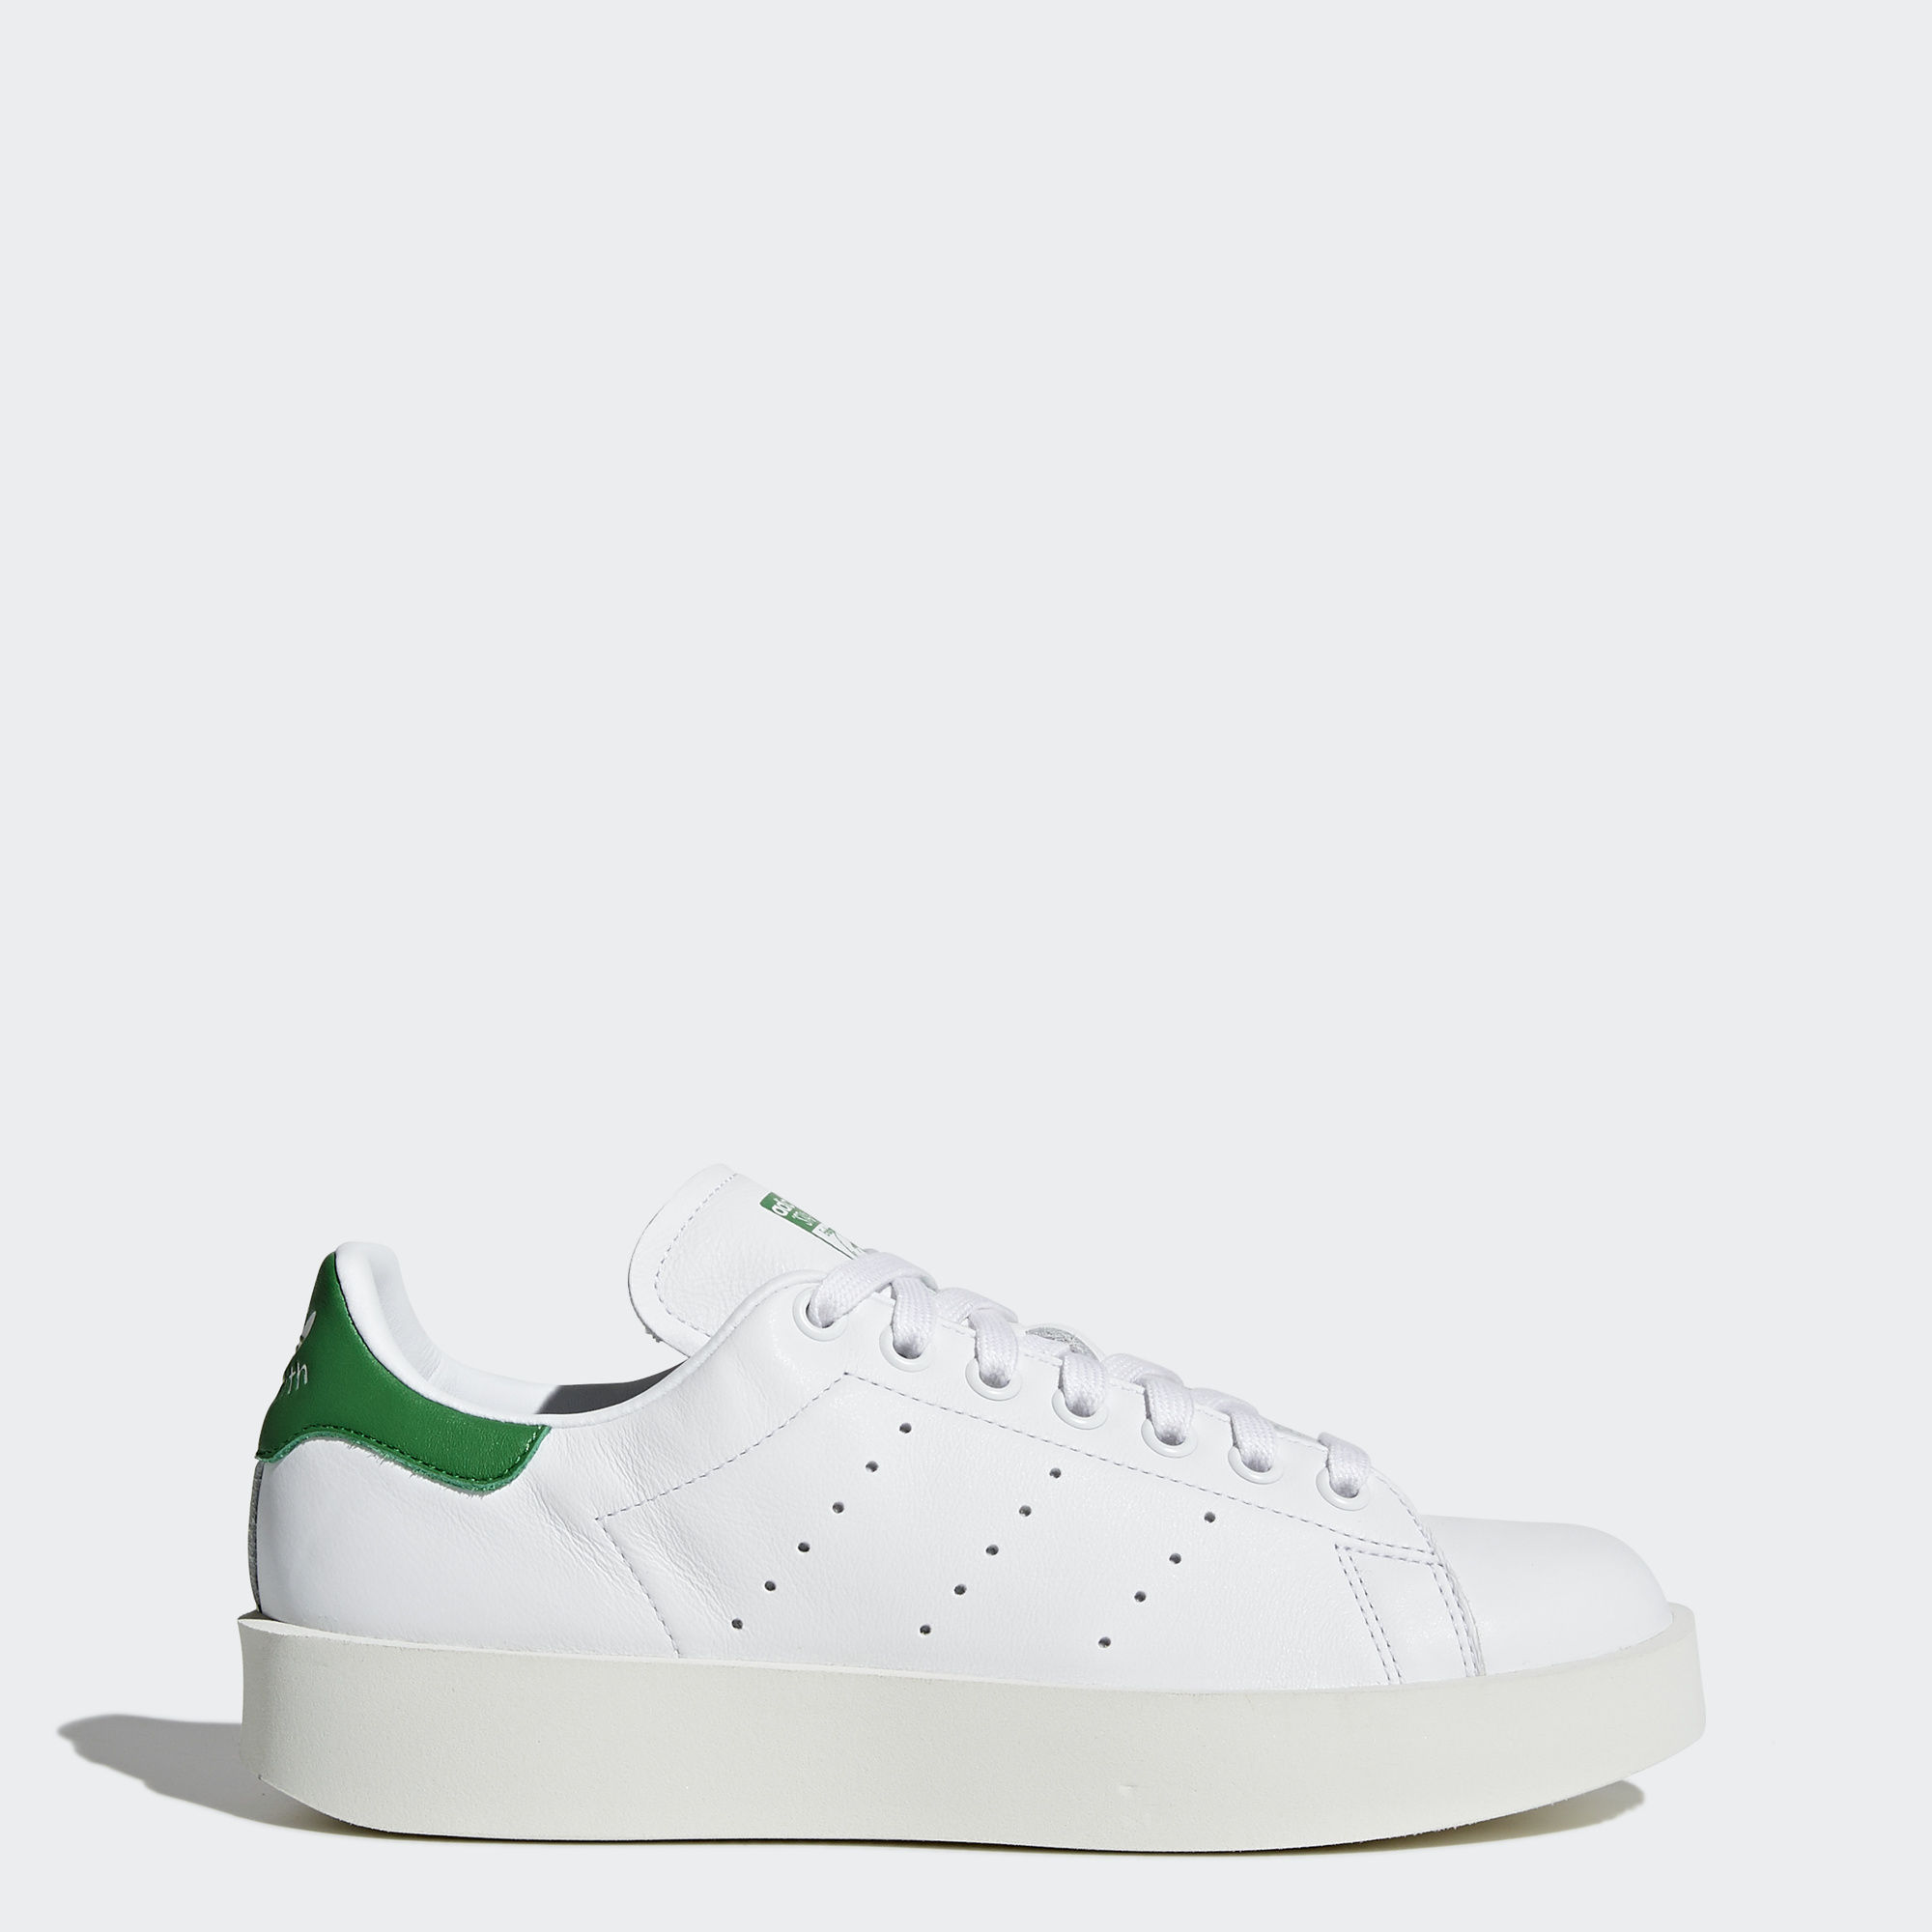 adidas stan smith chaussures femme